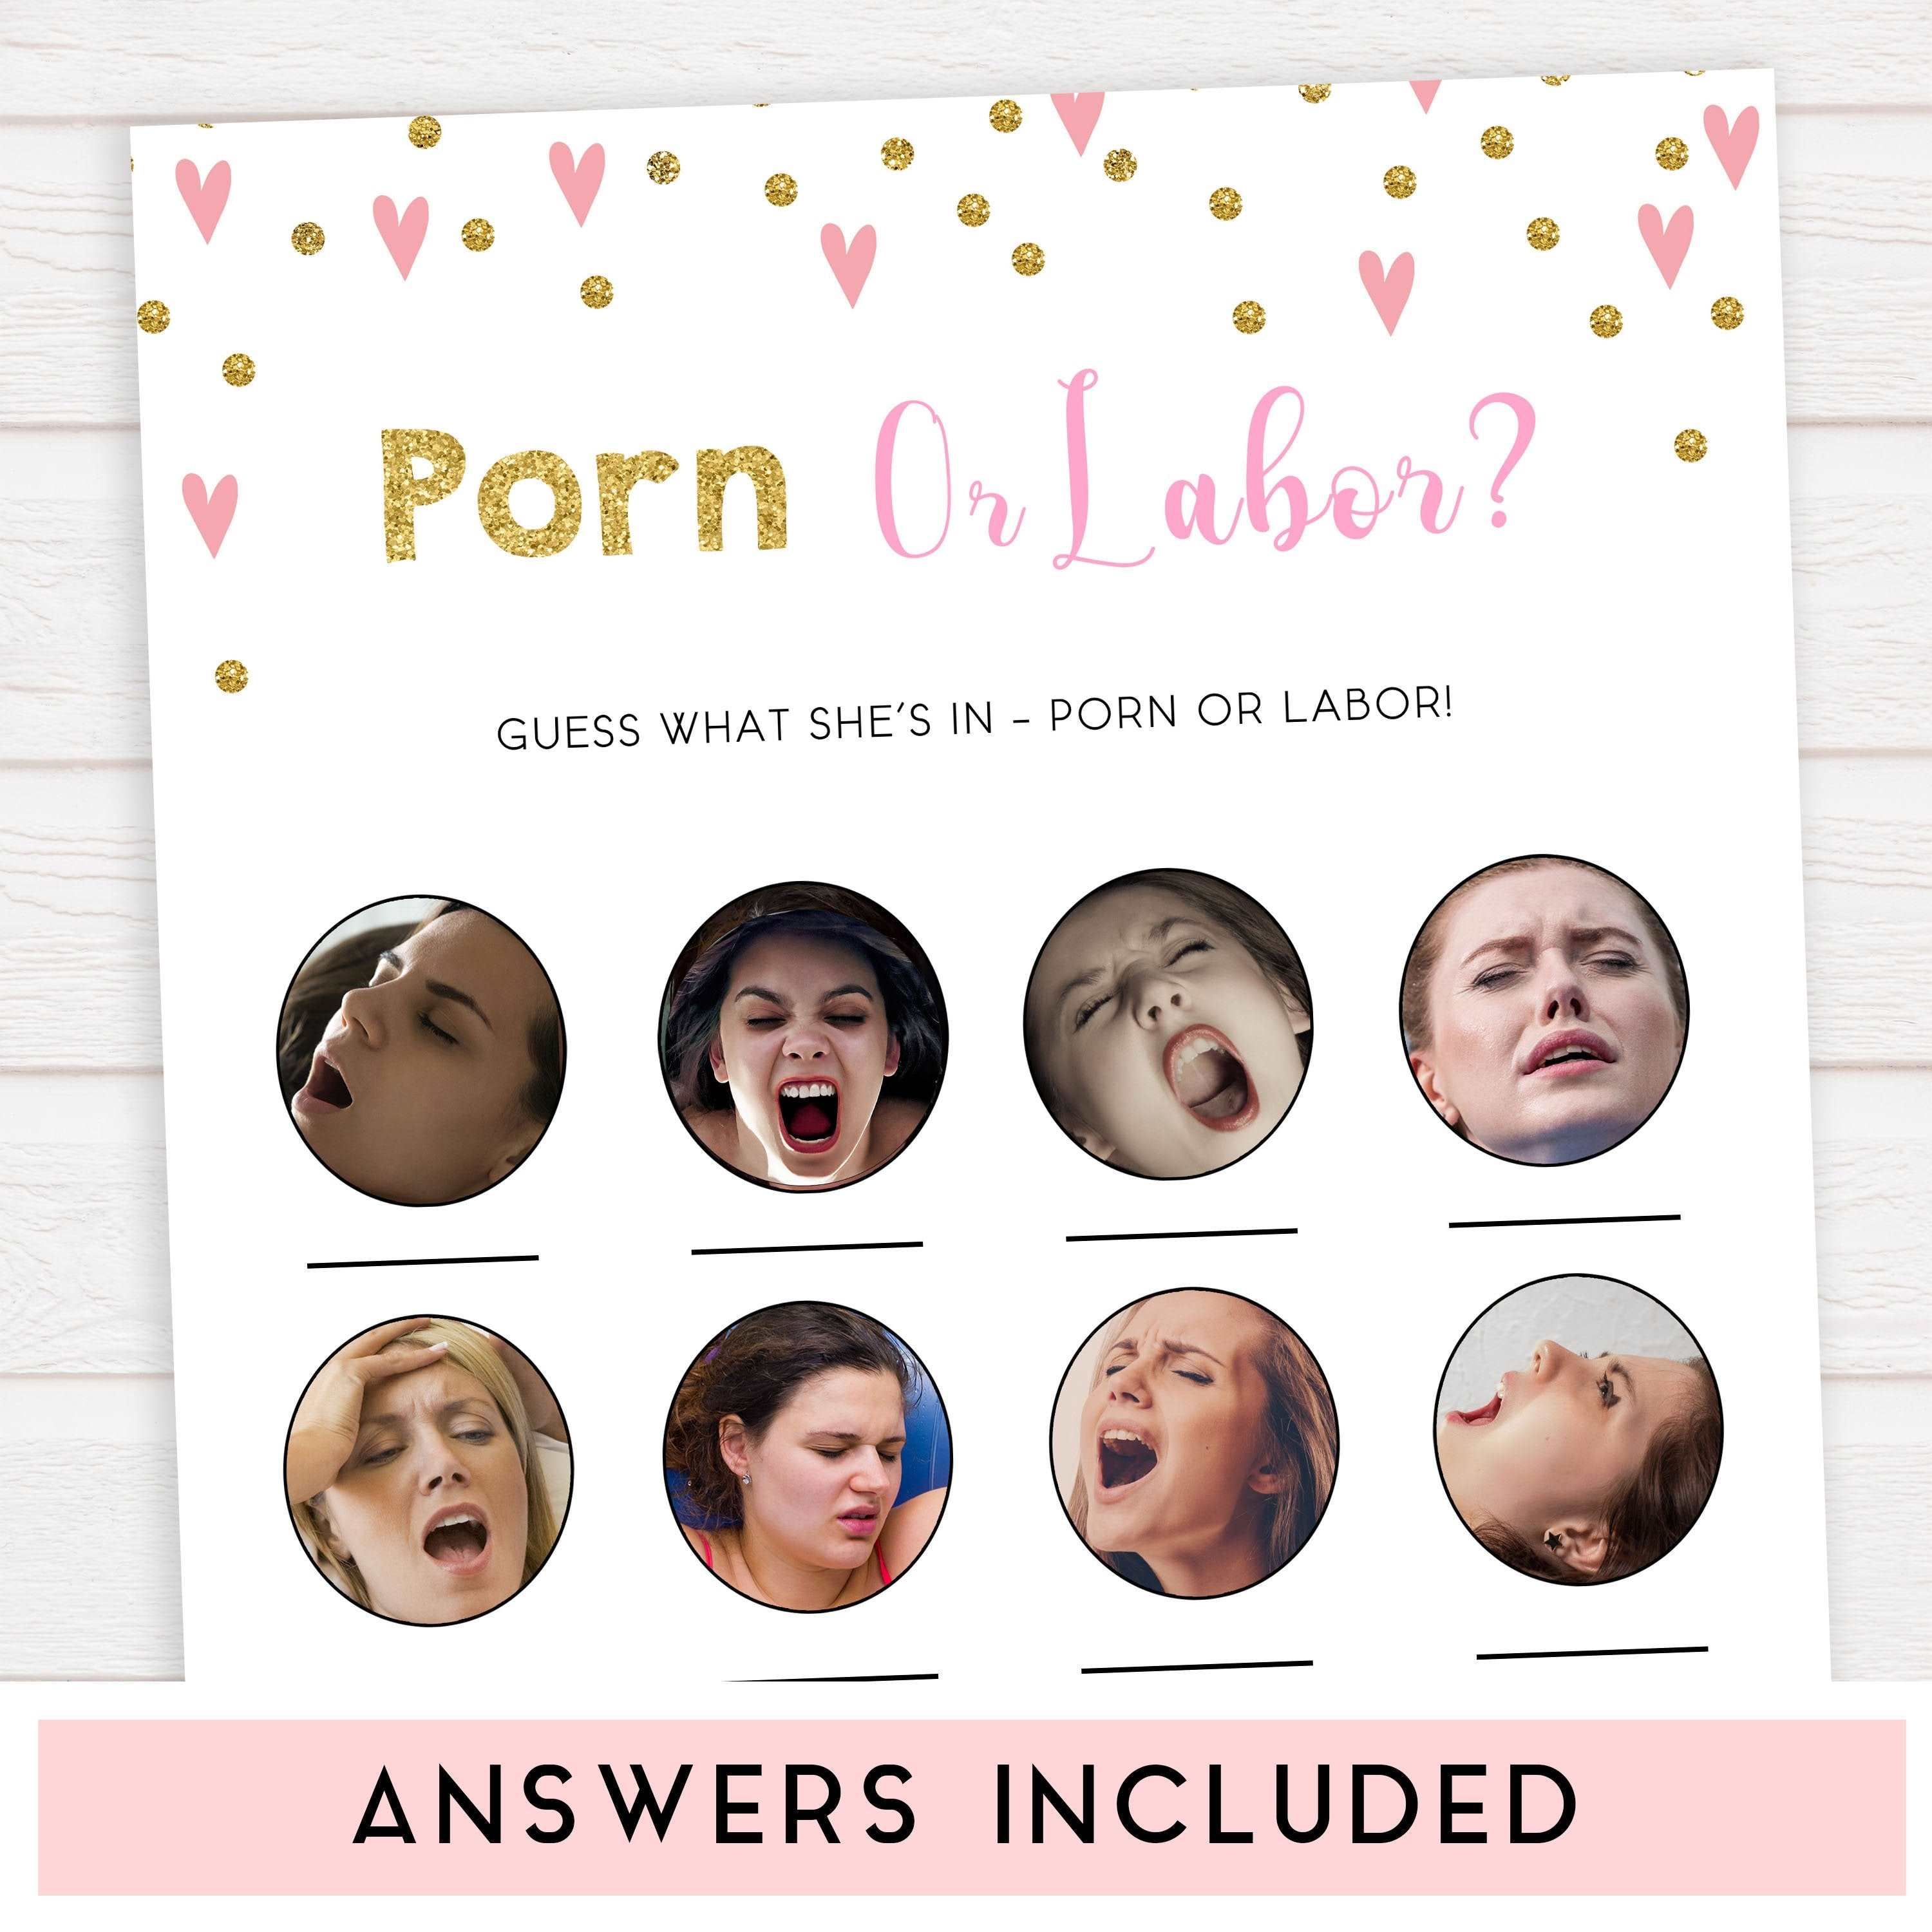 labor or porn, baby bump or beer belly, boobs or butts baby game, Printable baby shower games, small pink hearts fun baby games, baby shower games, fun baby shower ideas, top baby shower ideas, gold baby shower, pink hearts baby shower ideas